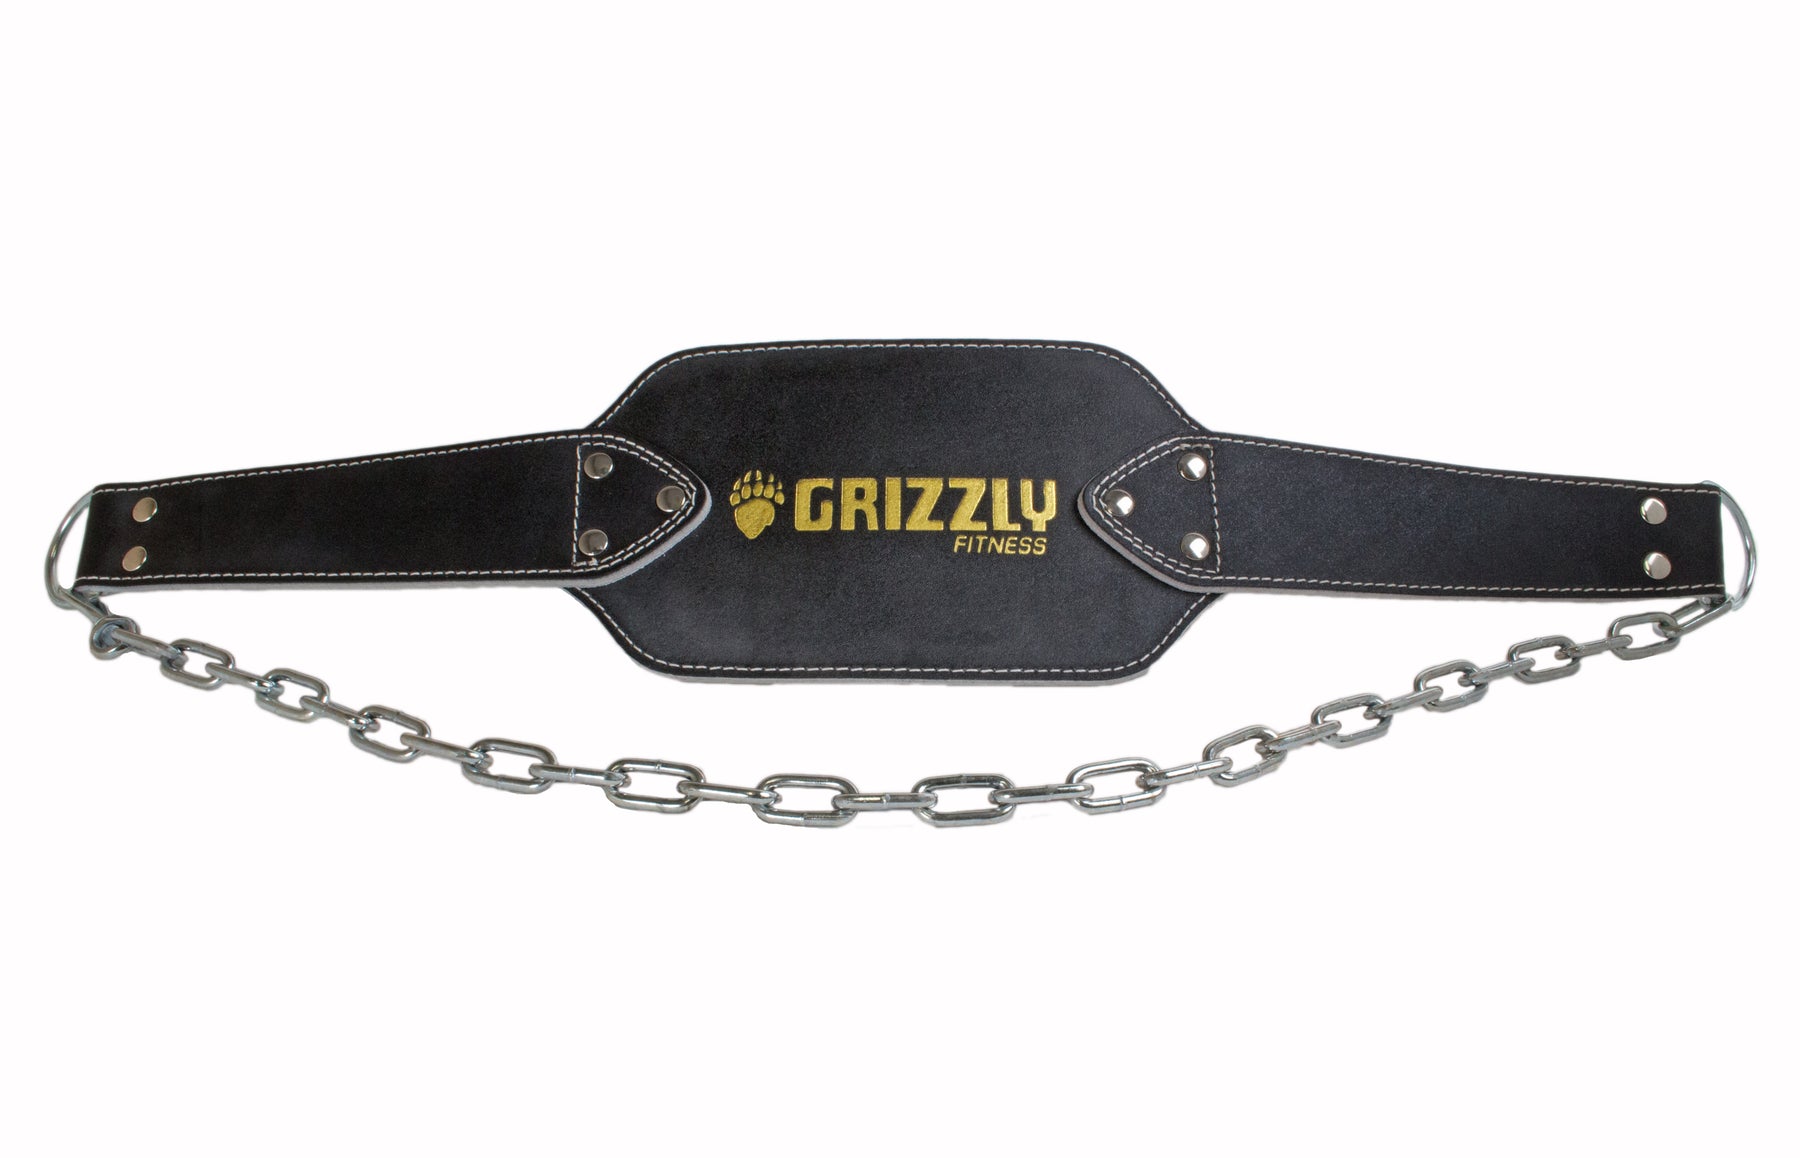 Grizzly Fitness Leather Pro Dip and Pull Up Ceinture de